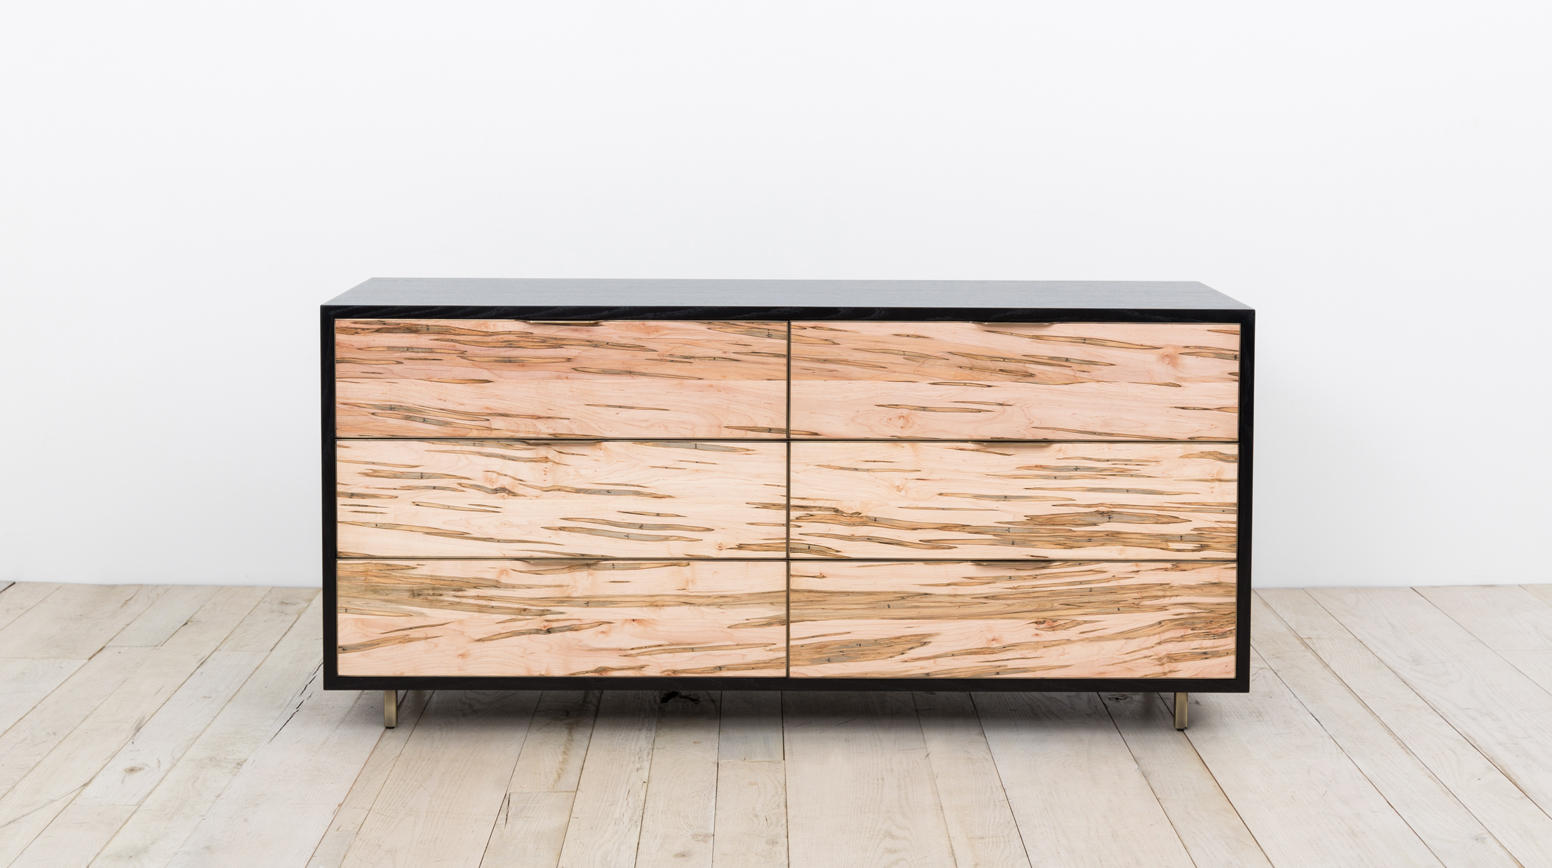 How To Buy Sideboards And Dressers Online?